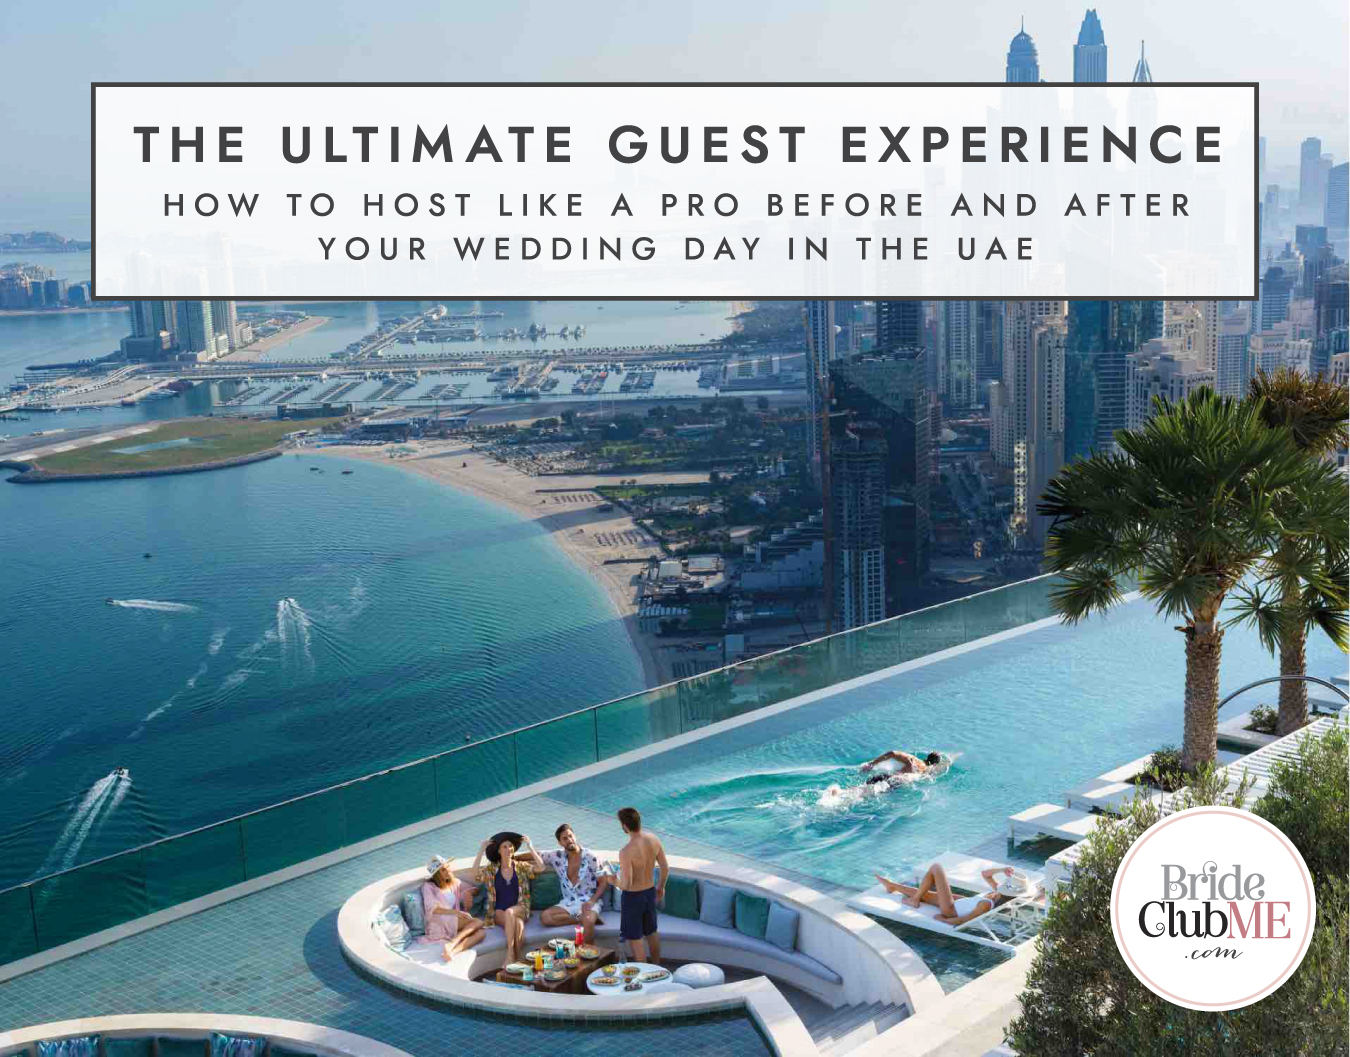 The Ultimate Guest Experience